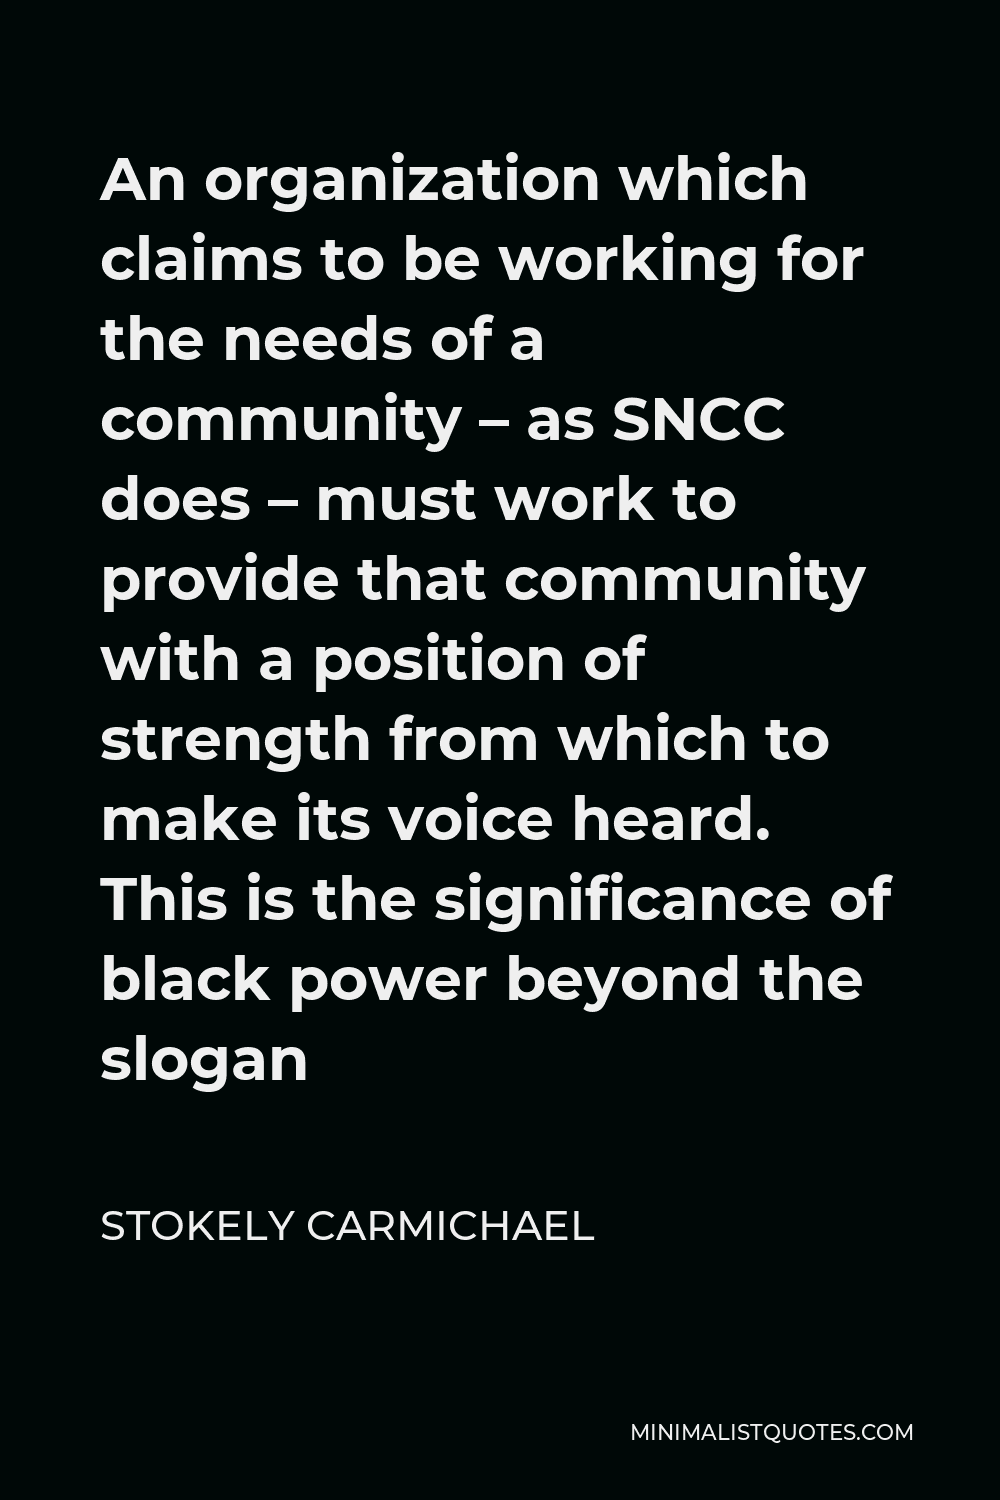 Stokely Carmichael Quote - An organization which claims to be working for the needs of a community – as SNCC does – must work to provide that community with a position of strength from which to make its voice heard. This is the significance of black power beyond the slogan